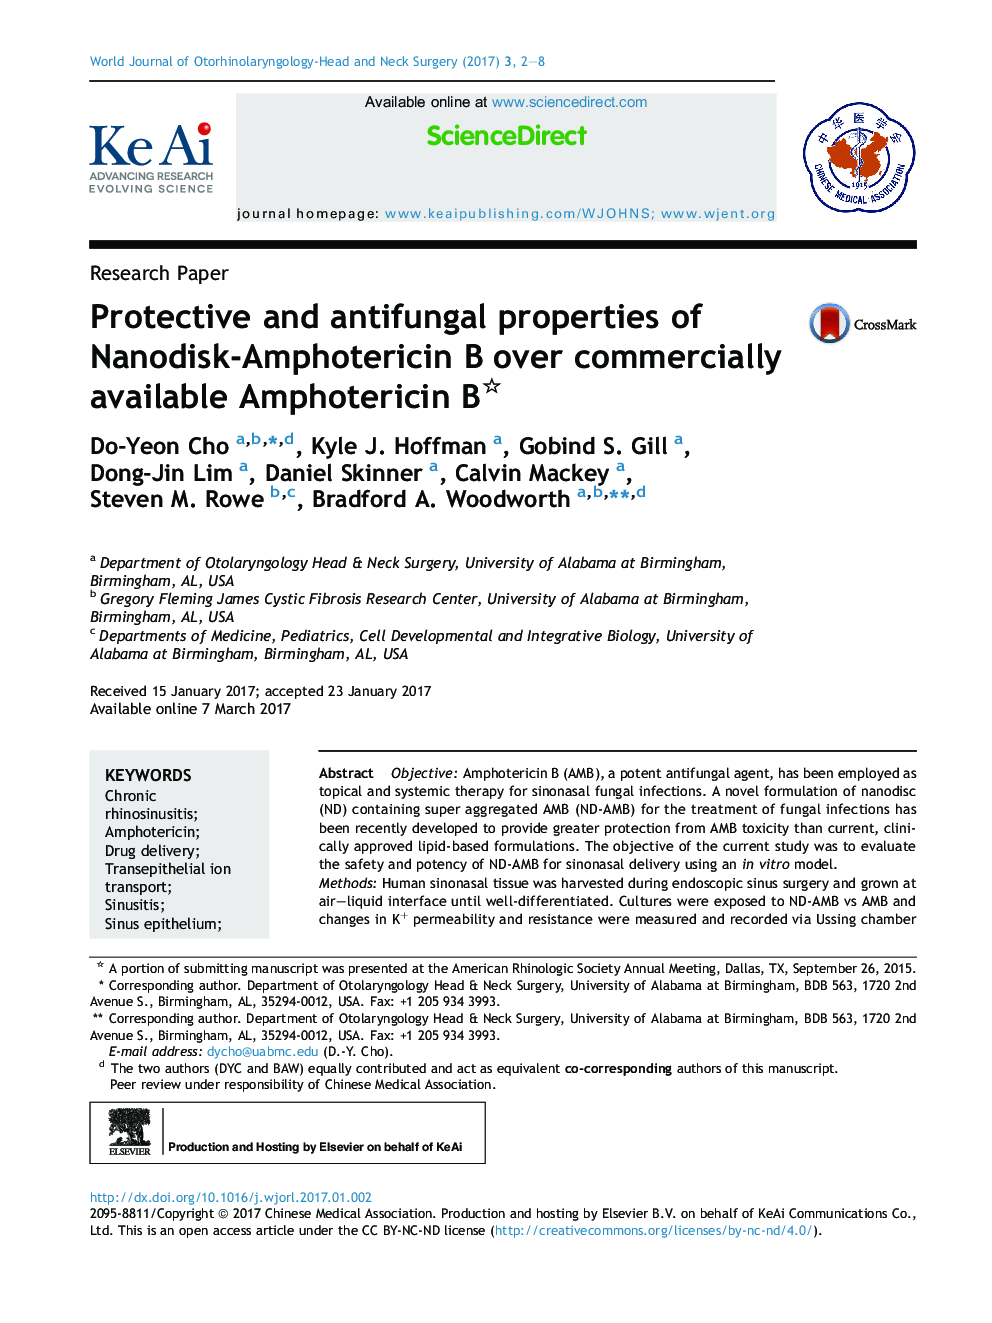 Protective and antifungal properties of Nanodisk-Amphotericin B over commercially available Amphotericin B